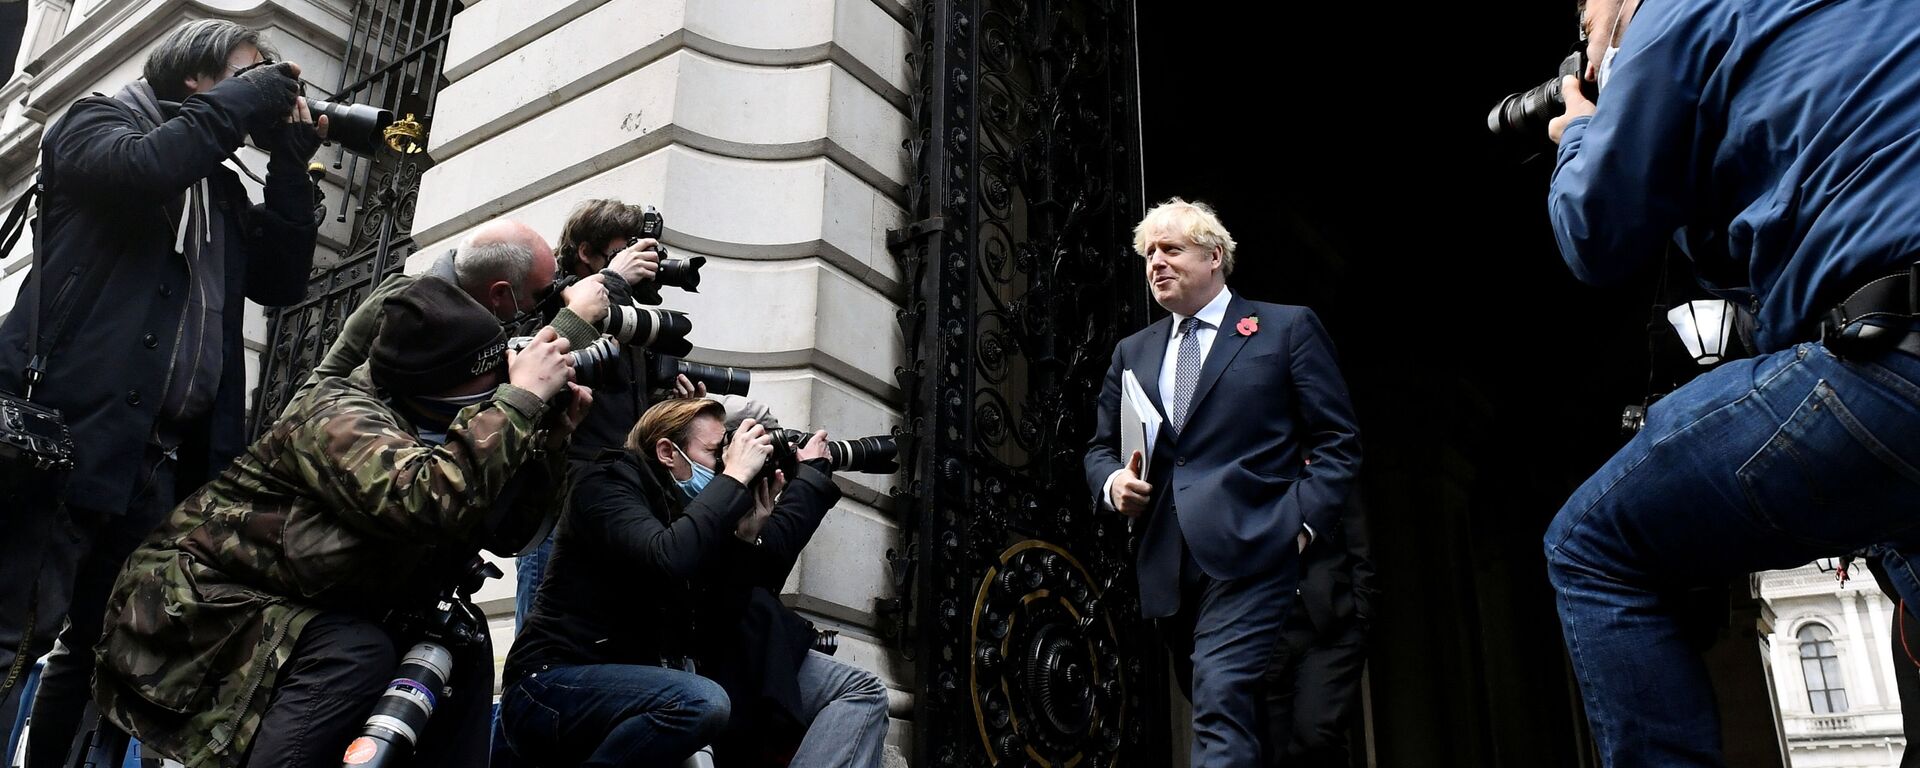 Britain's Prime Minister Boris Johnson leaves after a cabinet meeting at the Foreign and Commonwealth Office (FCO) in London, Britain  - Sputnik International, 1920, 10.12.2020